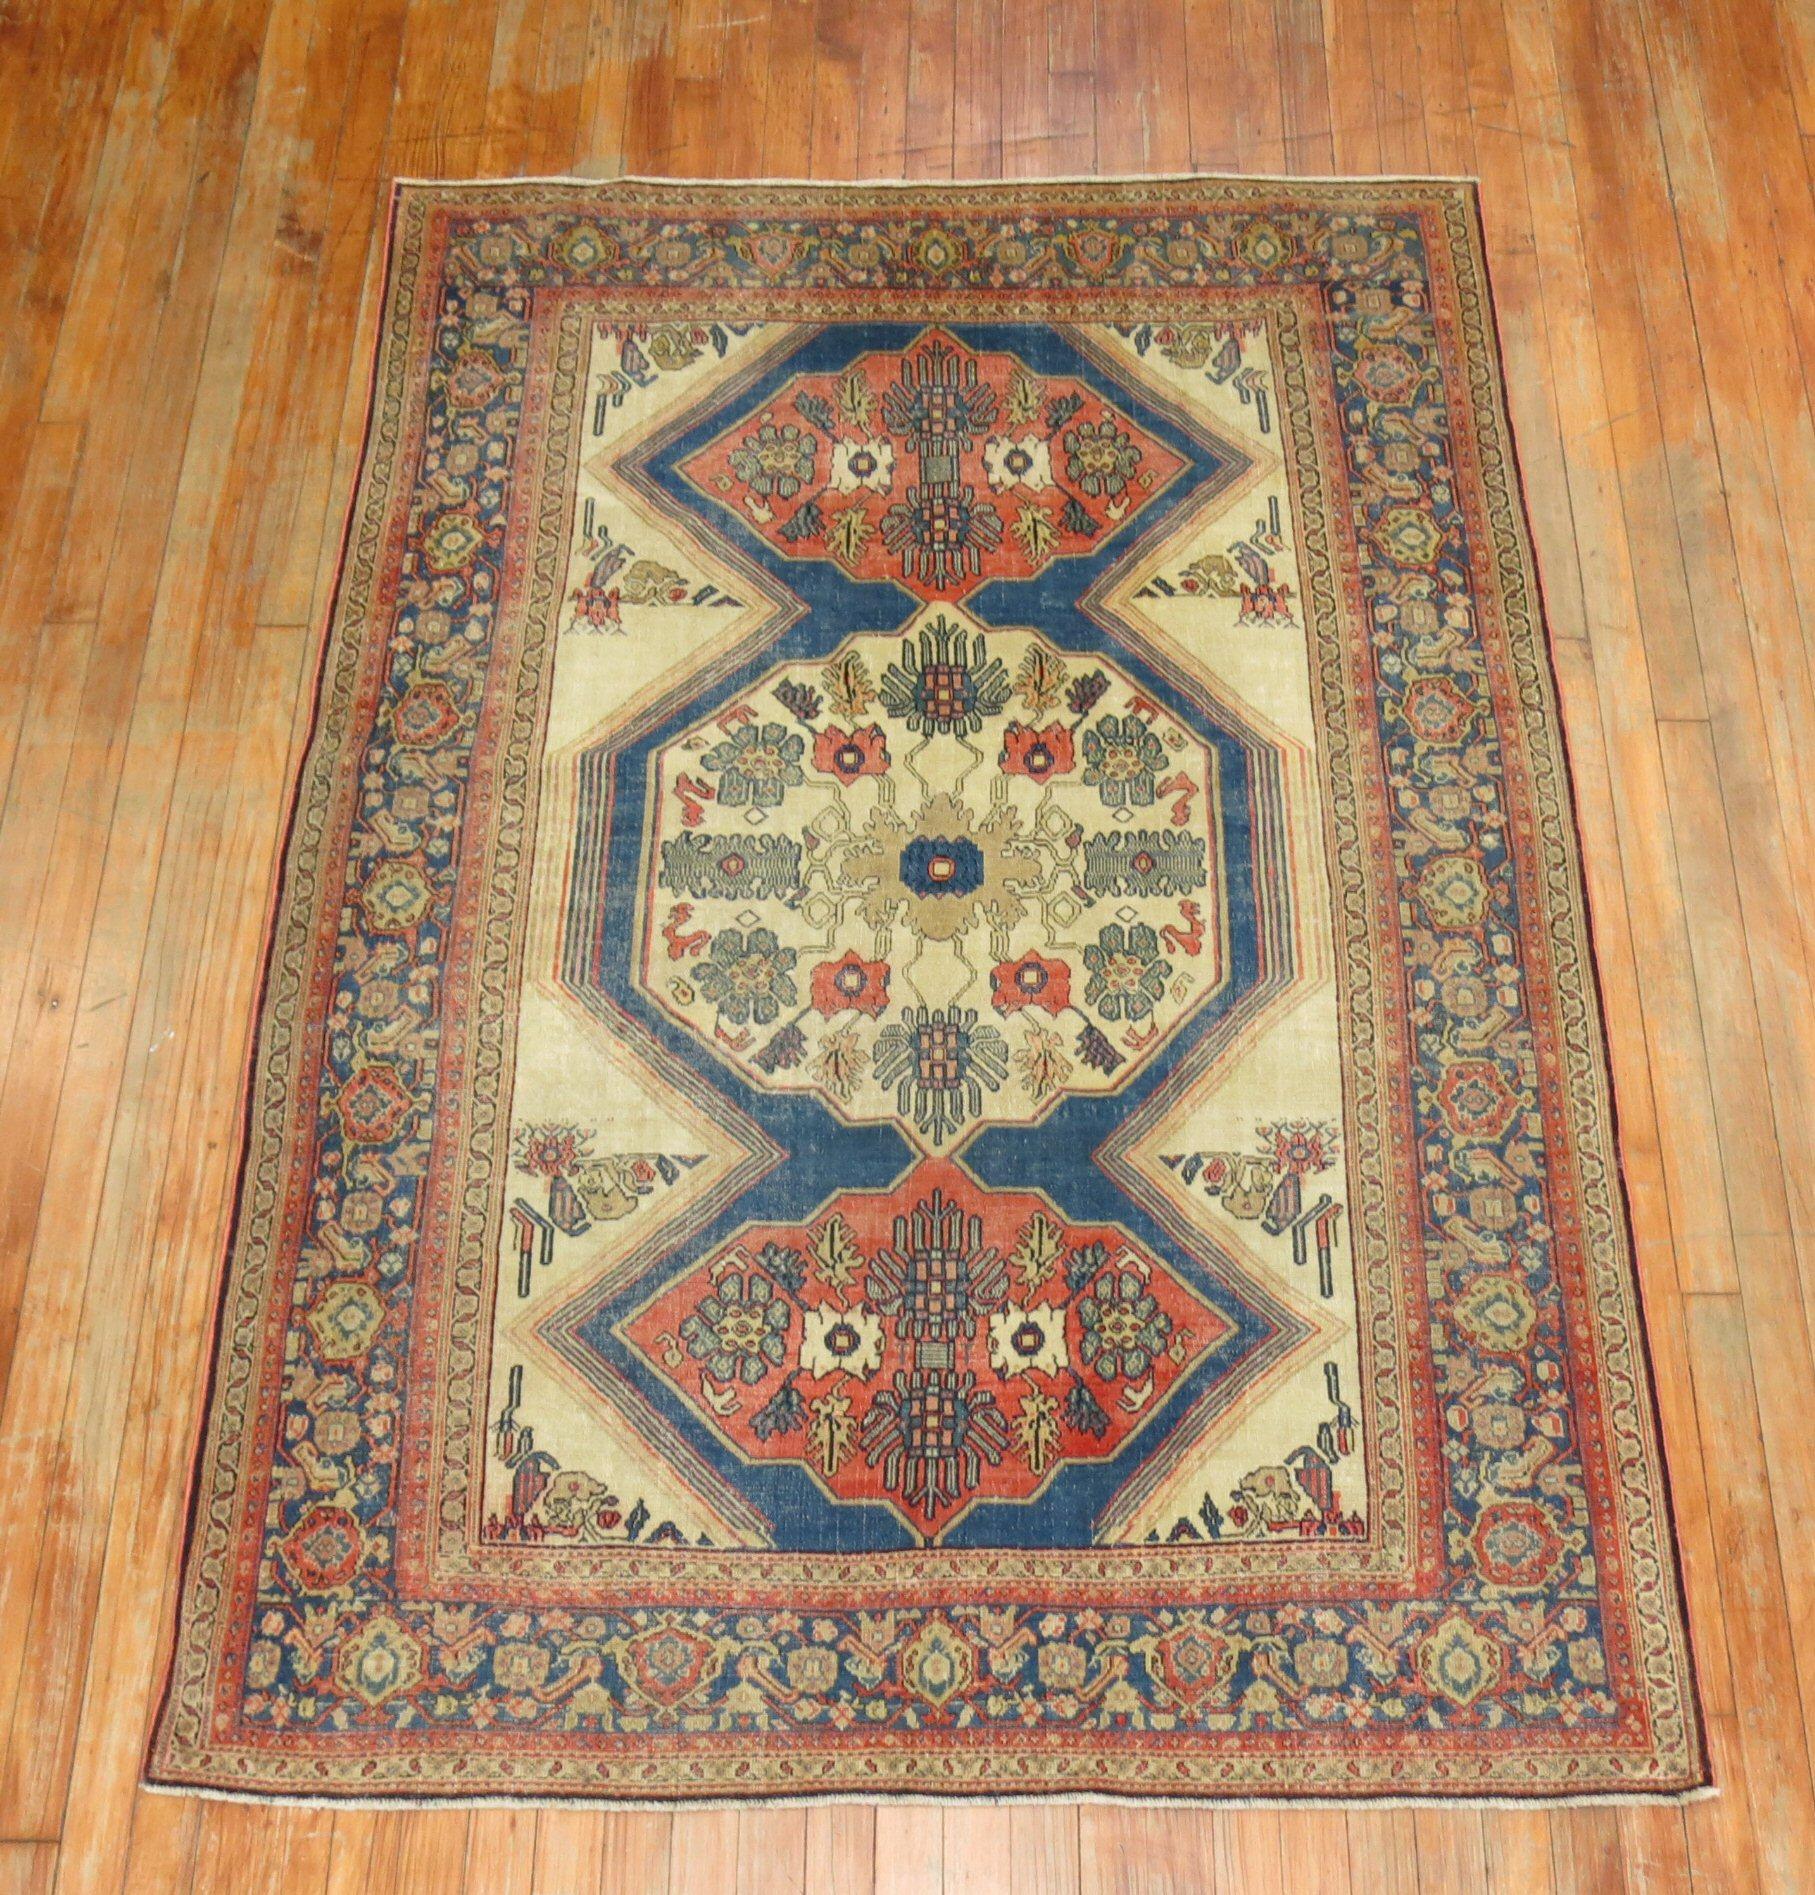 An authentic early 20th century tribal Persian Senneh rug. 

Antique Senneh rugs are one of the most distinctive of all Persian rugs. Even though the designs are often copied by Bidjar Rugs and Tabriz Rugs but just touching the rugs. Antique